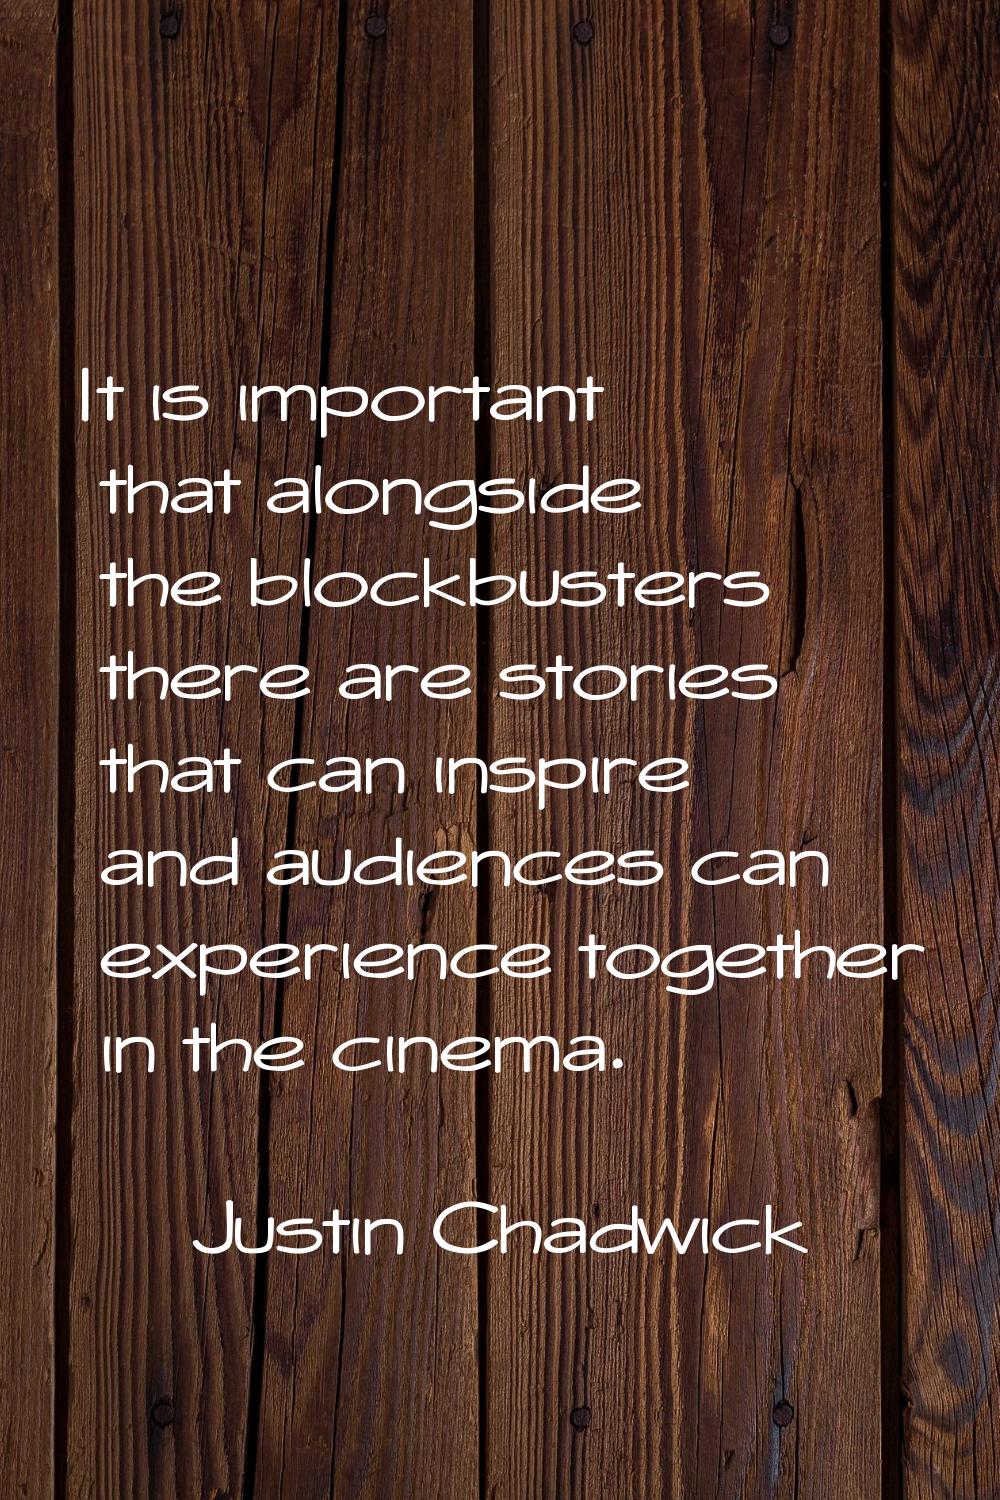 It is important that alongside the blockbusters there are stories that can inspire and audiences ca